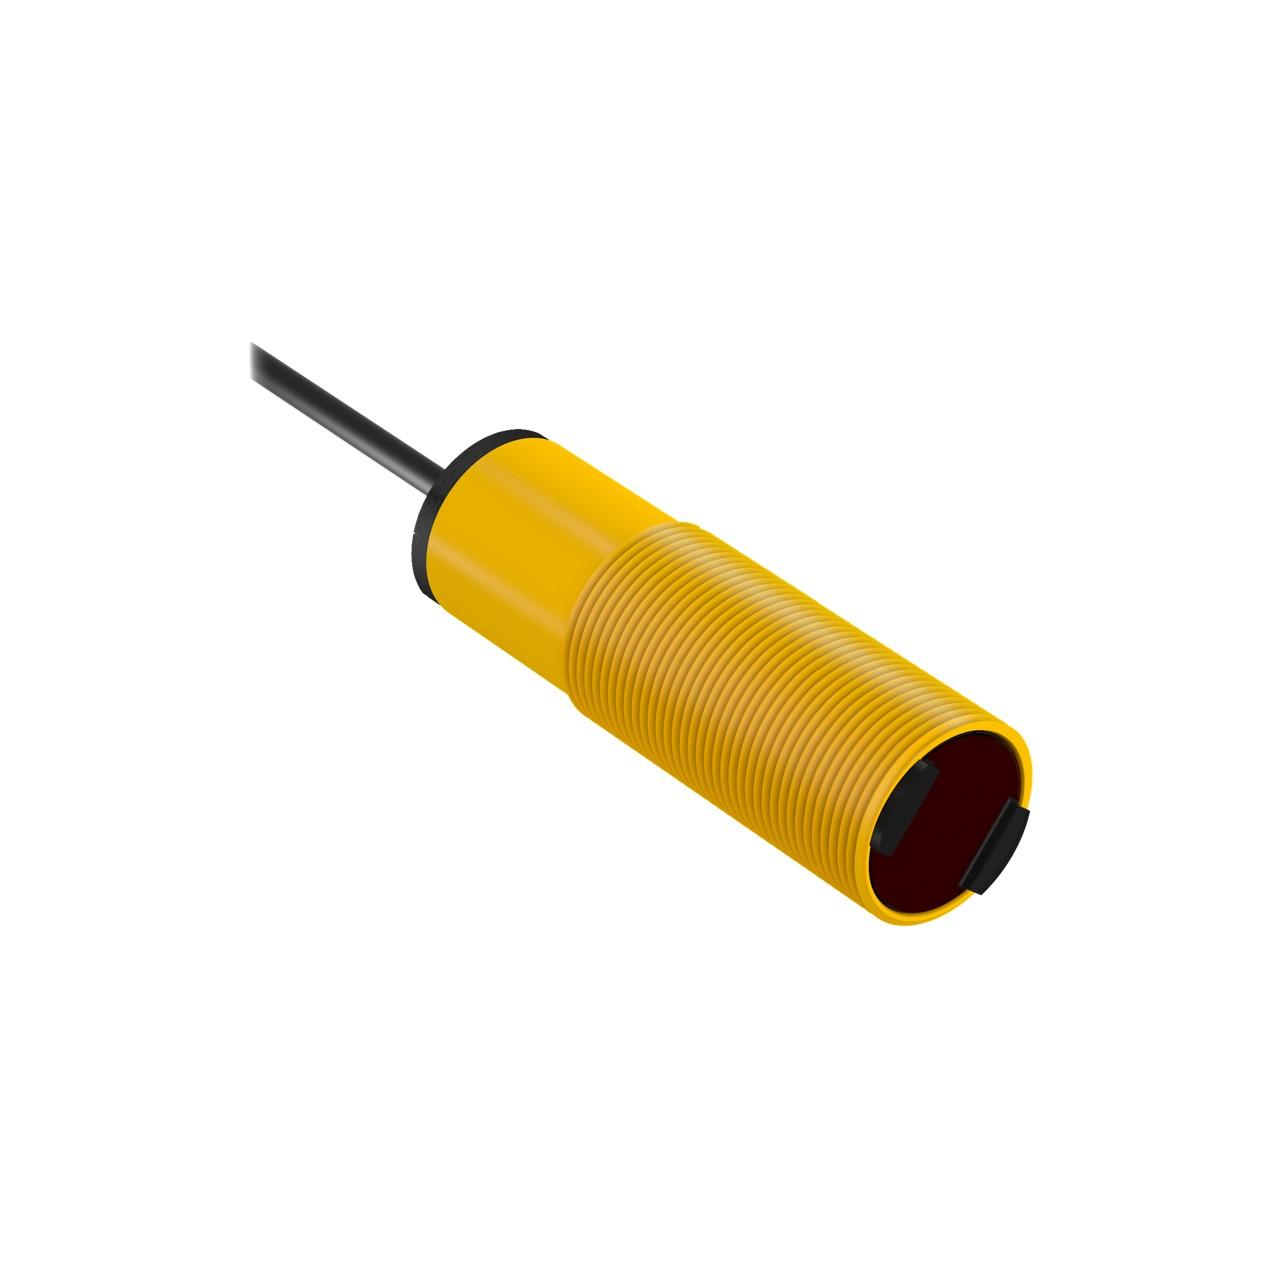 Banner S18SN6FF100QP Banner Engineering S18SN6FF100QP is a fixed-field photo-electric sensor from the S18 DC series, designed with a background suppression system. It features a thermoplastic housing with an acrylic lens and is pre-wired with a 6" / 150mm pigtail terminated with a 4-pin Euro-style M12 connector. This sensor operates within a supply voltage range of 10Vdc-30Vdc (12Vdc / 24Vdc nom.) and can function in ambient air temperatures ranging from -40 to +70°C. It offers a degree of protection rated at IP67, IP69K, and NEMA 6P, ensuring durability in various environmental conditions. The sensor has an M18 cylindrical threaded/barrel shape, includes 1 x digital output (NPN transistor; complementary NO/NC), and provides a sensing distance of 100mm. It utilizes infrared (IR) light with a wavelength of 880 nm and has a response time of 3ms / 0.003 s. The operating modes available are Light-ON and Dark-ON, with a thread size of M18.